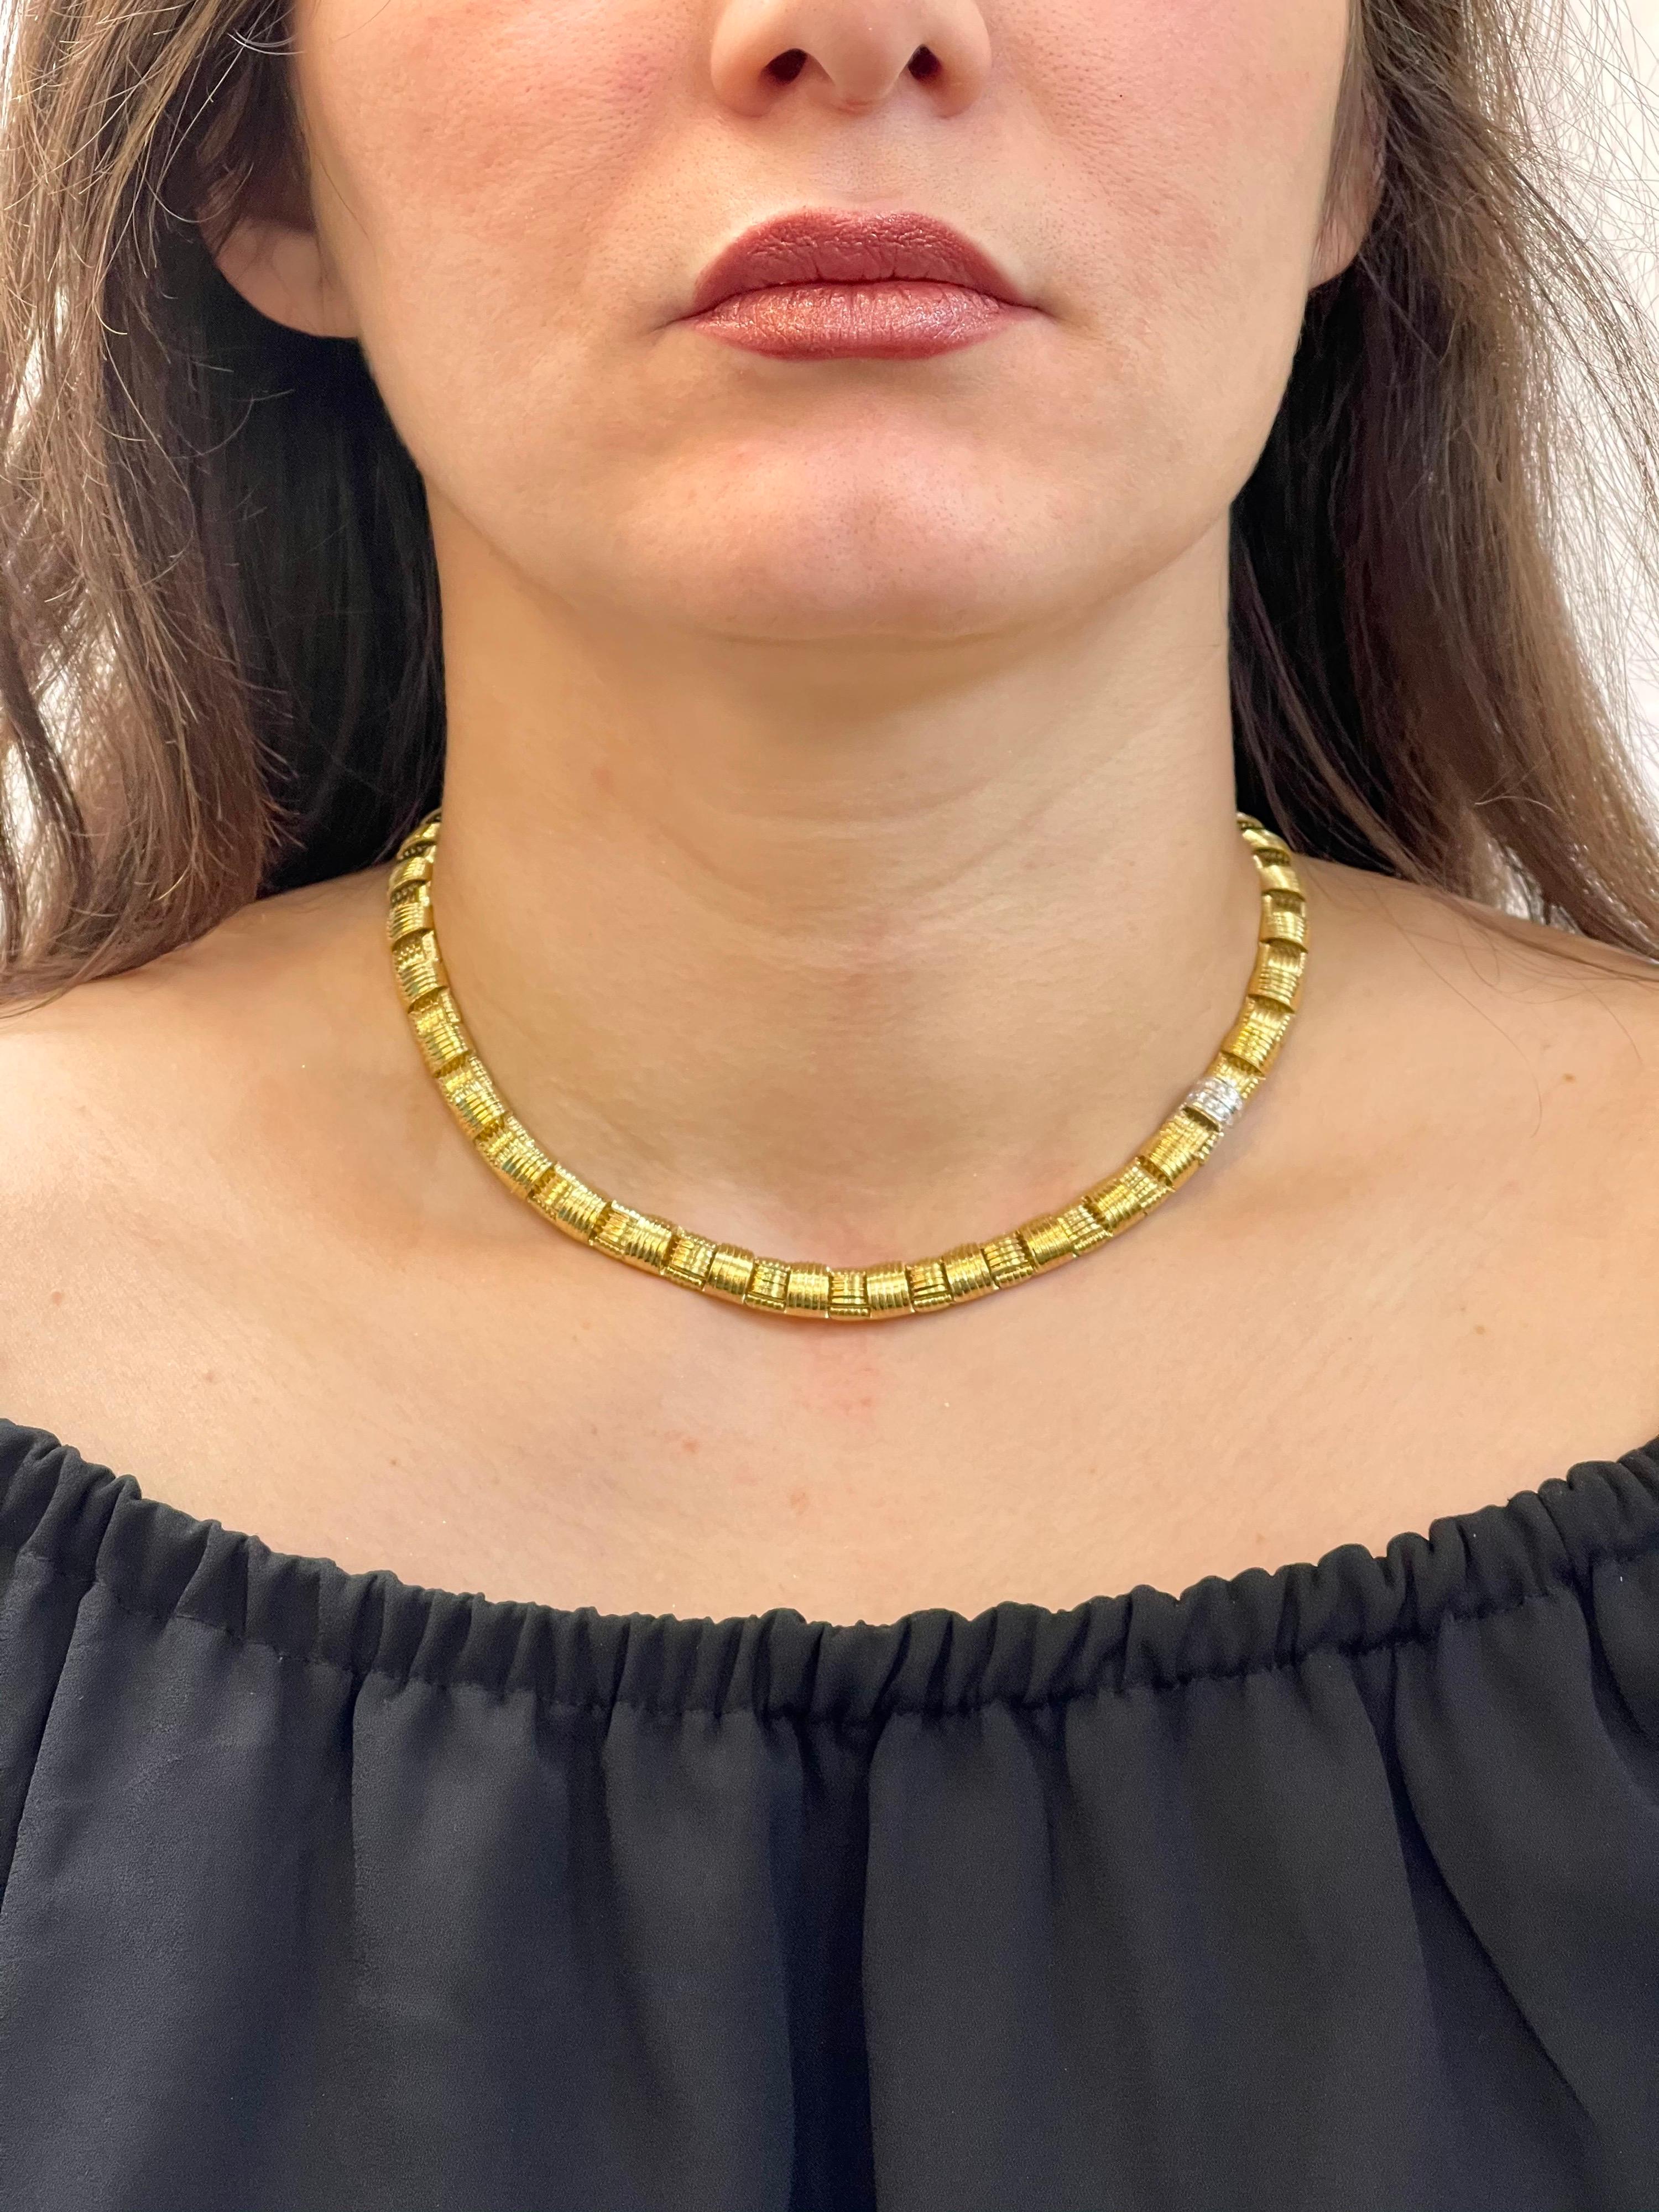 Roberto Coin Appassionata Necklace in 18 Karat Gold 70 Grams and Diamonds For Sale 6